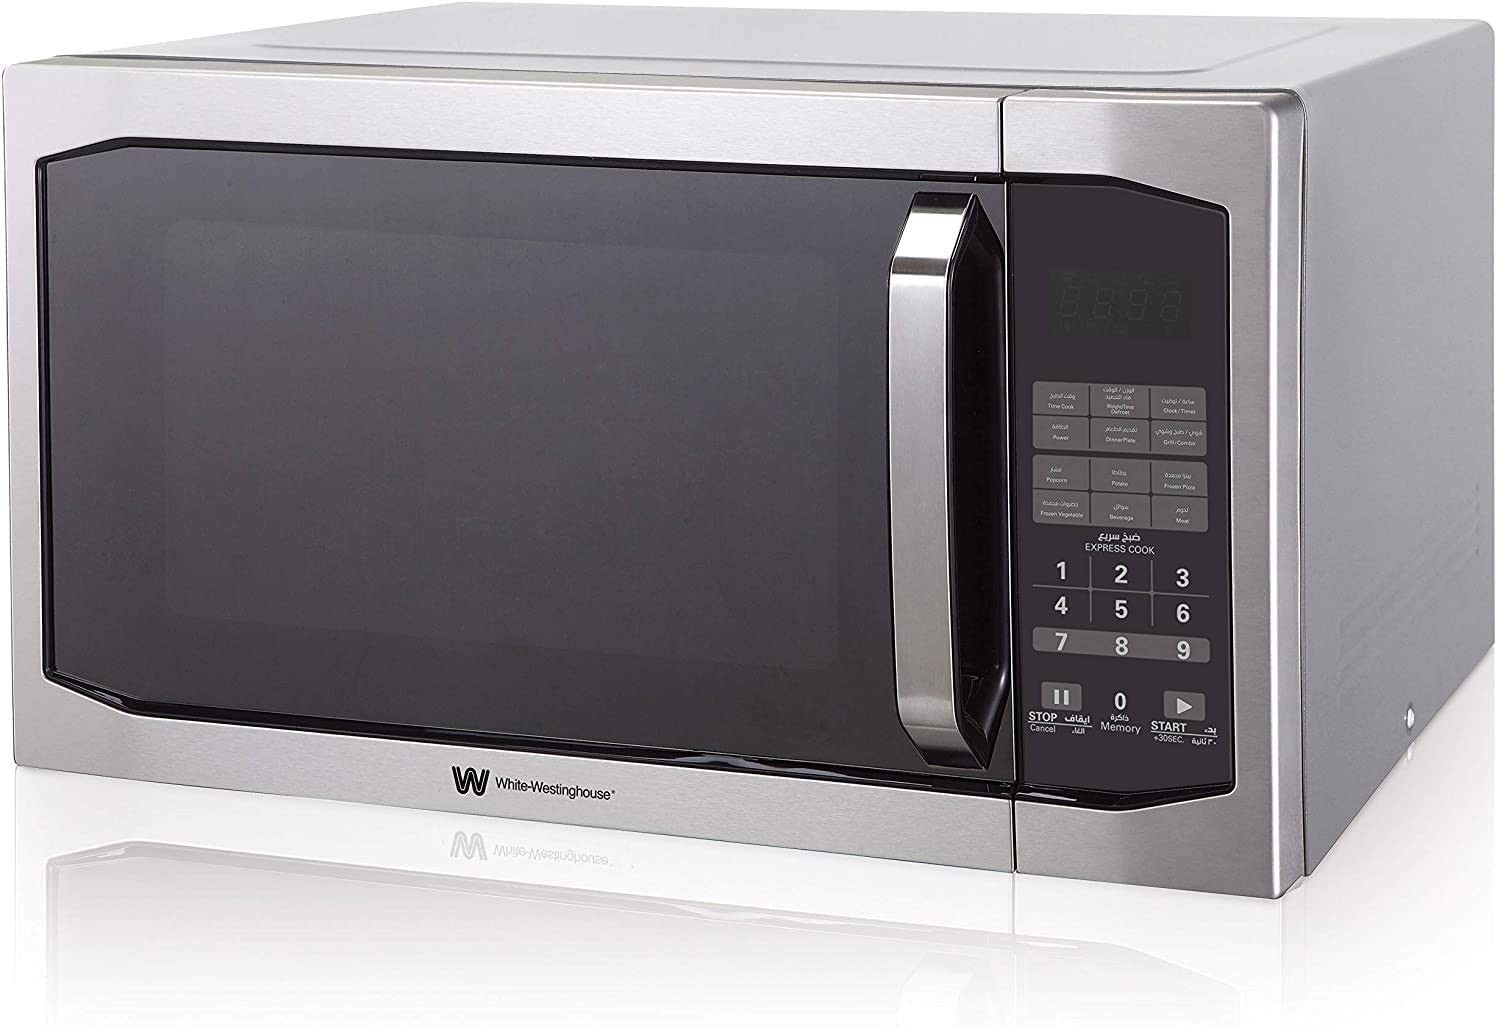 White westinghouse microwave oven 42 liters with grill 1